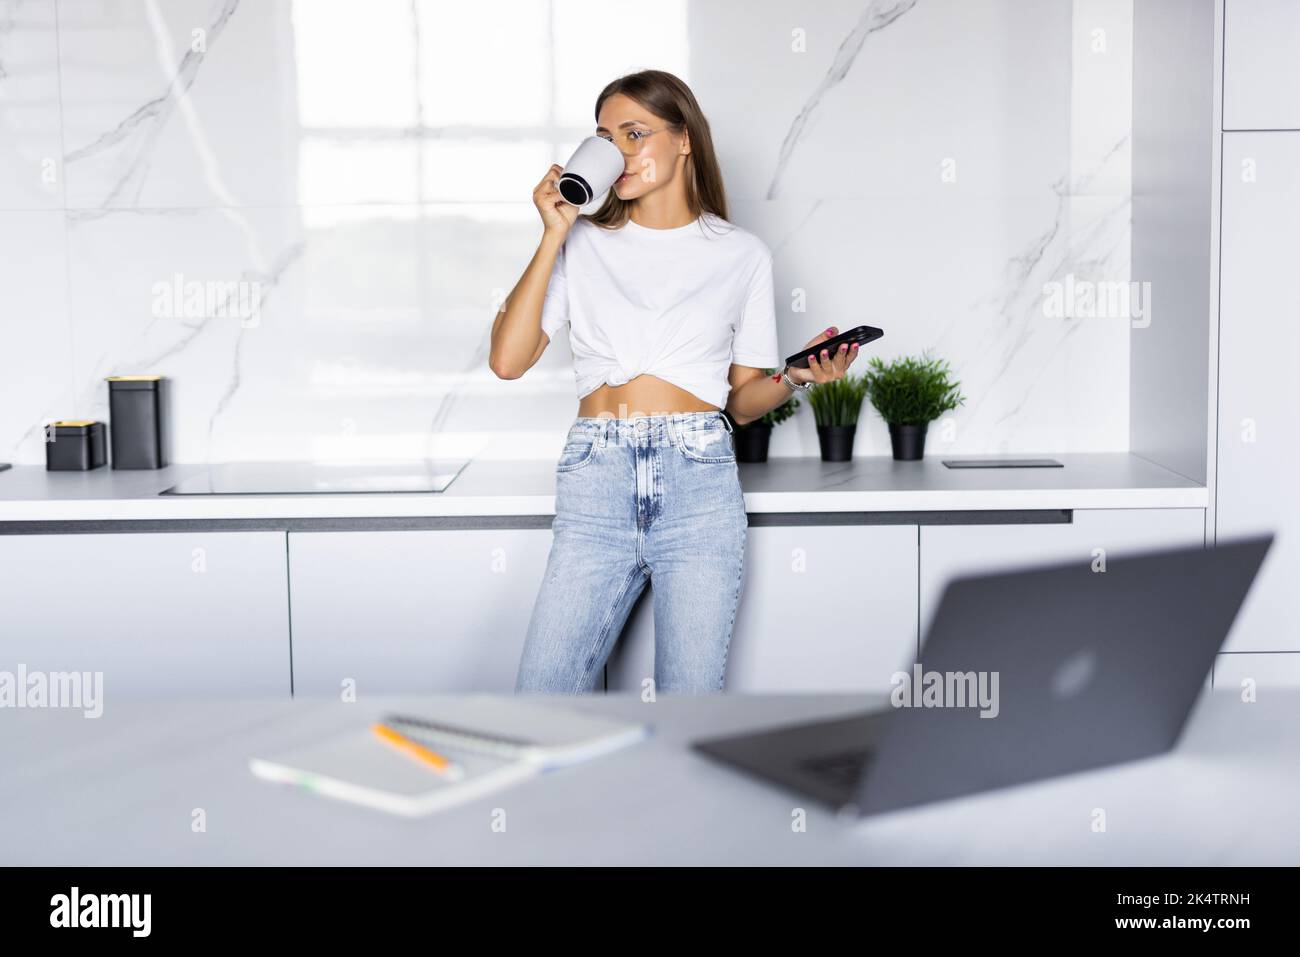 Young woman using smartphone leaning at kitchen table with coffee mug and organizer in a modern home. Smiling woman reading phone message. Brunette ha Stock Photo